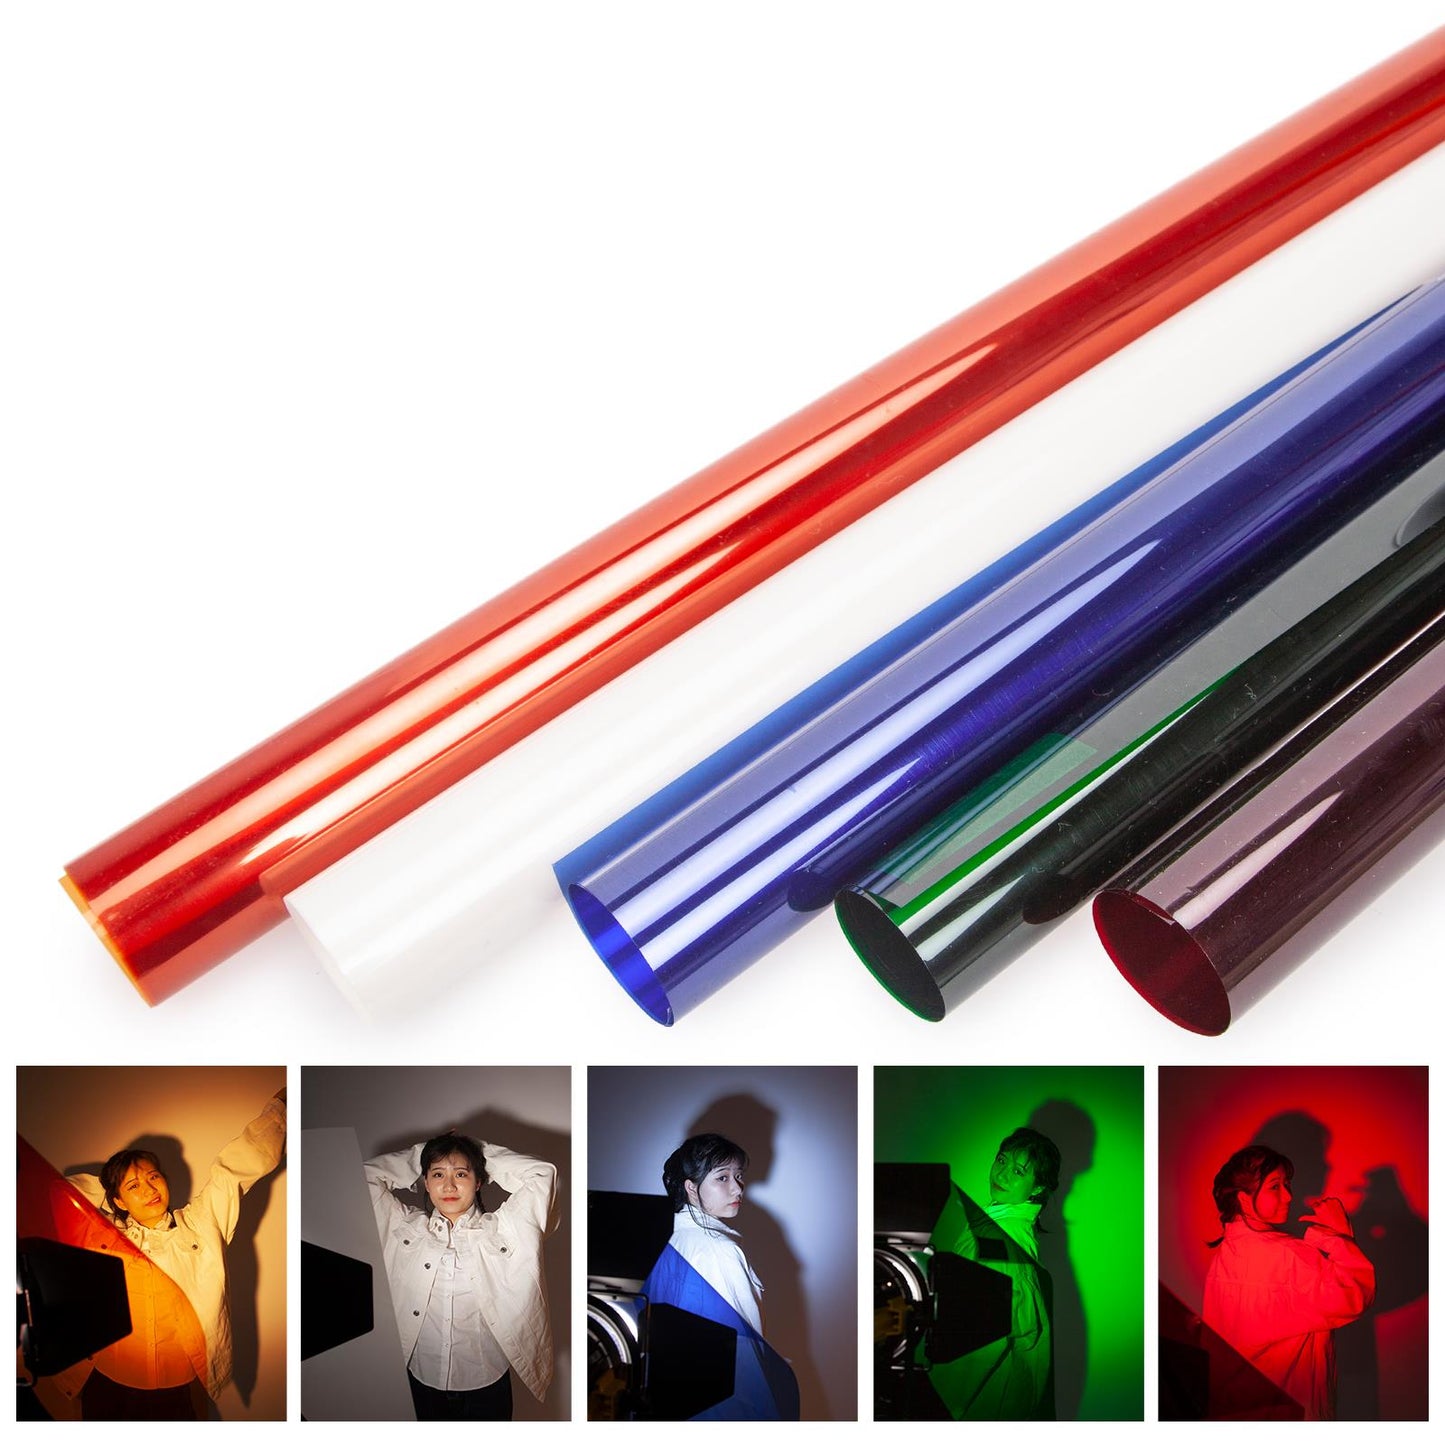 Complete Colors Daylight Filter Gel For 800W Red Head Video Continuous Lighting Studio 5 Colors